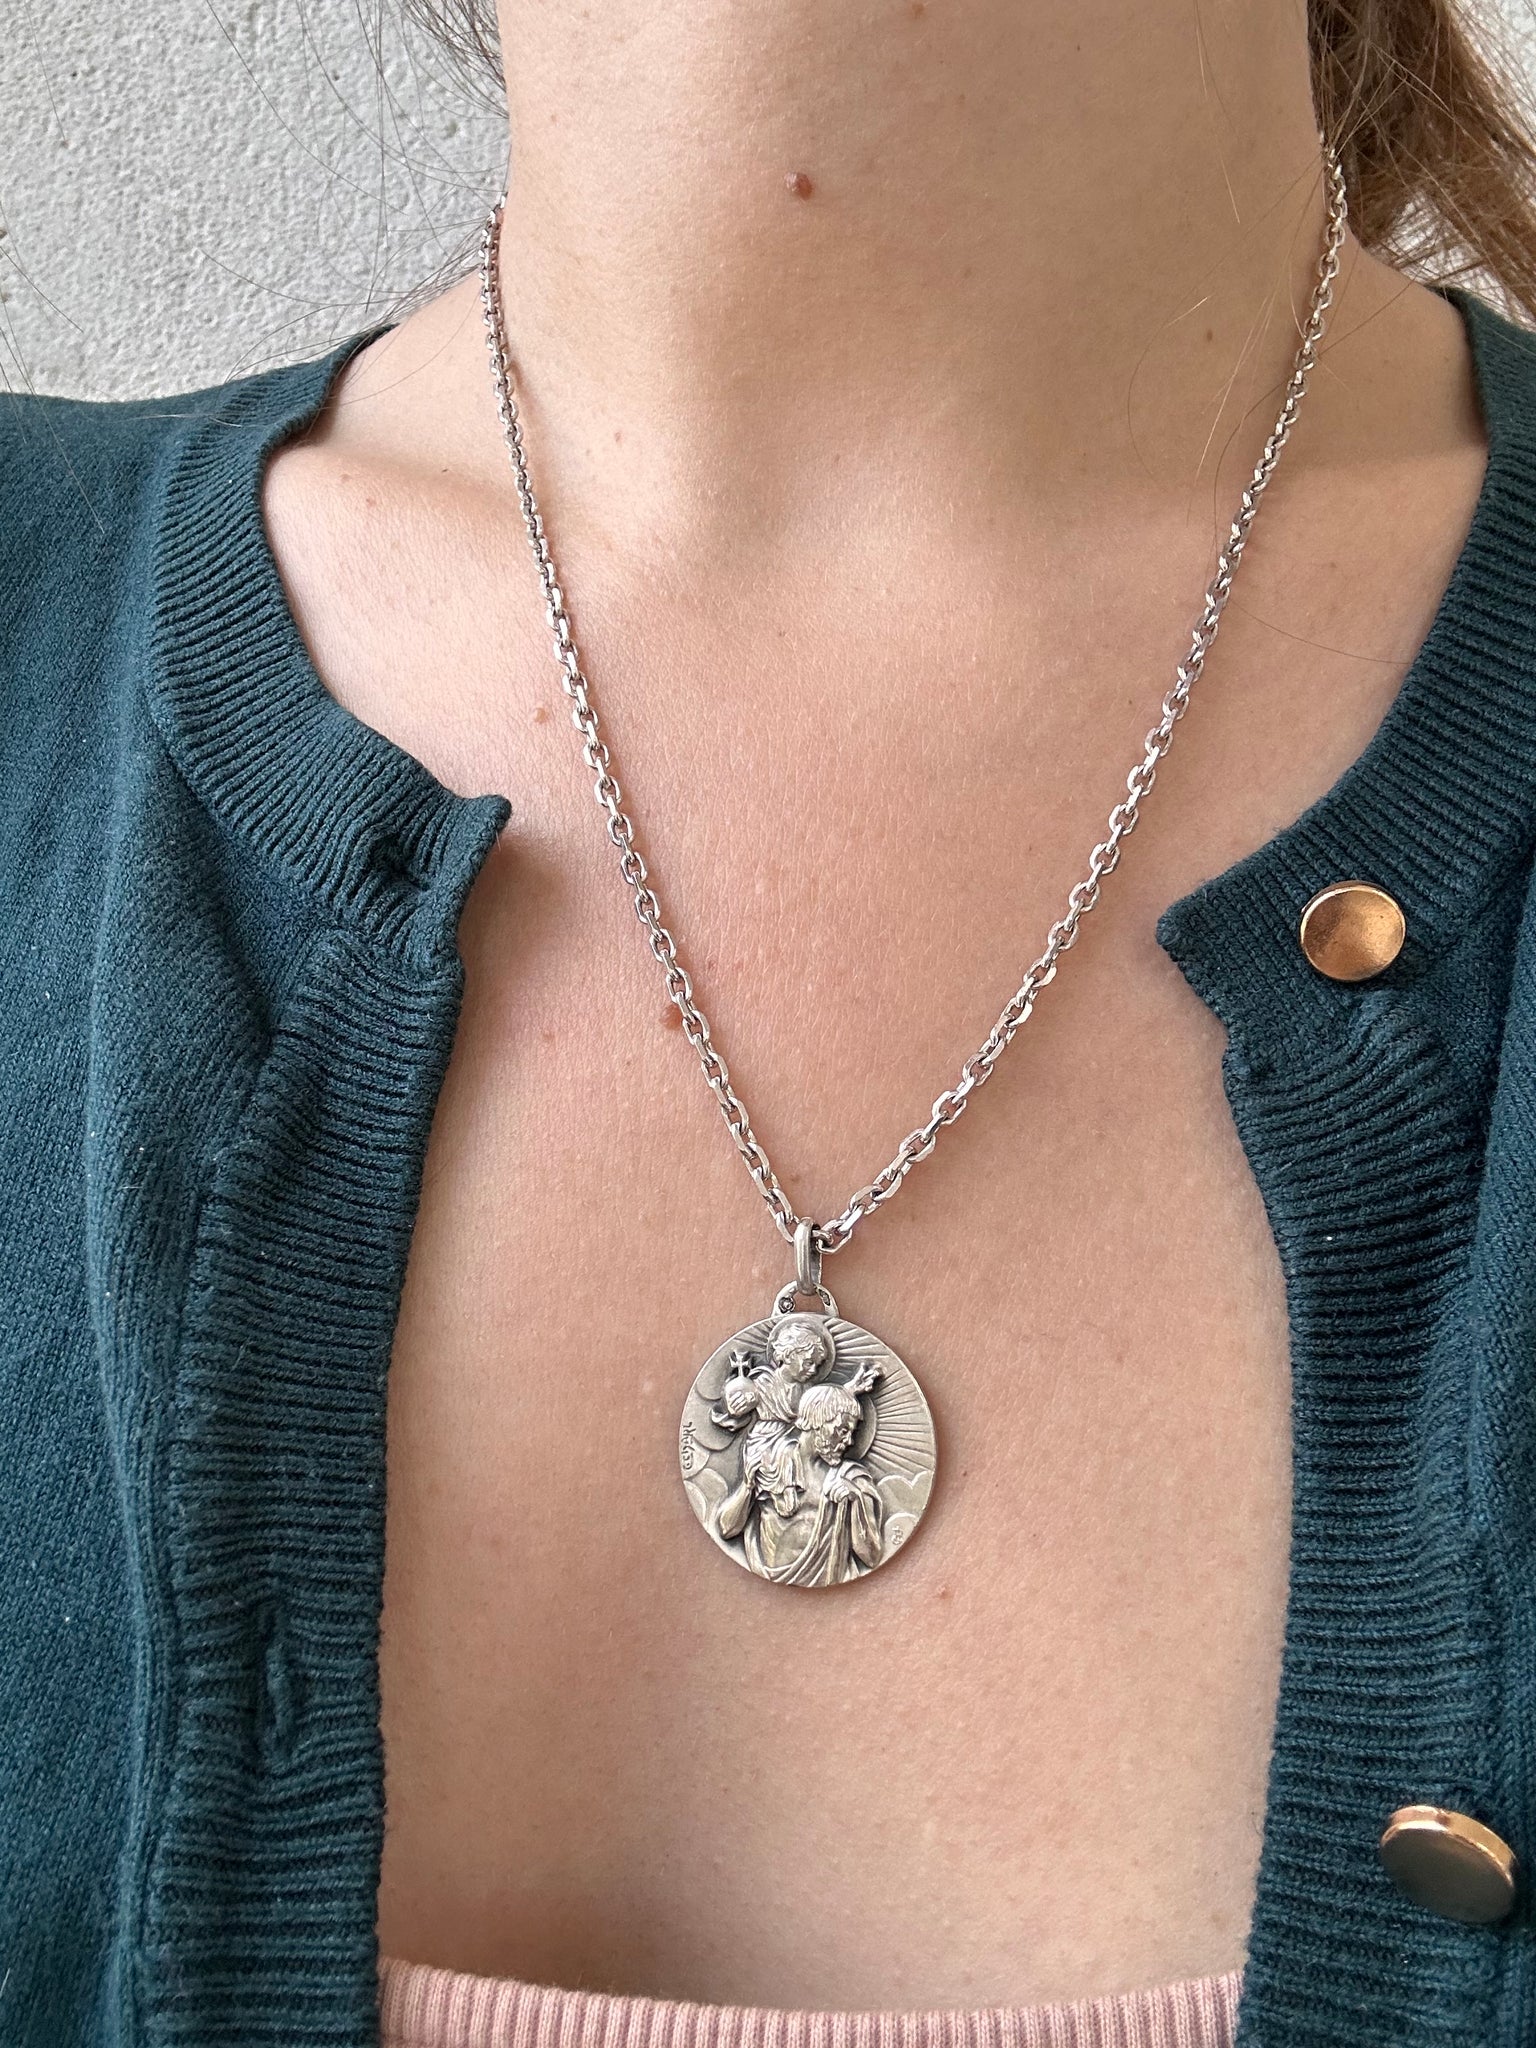 St Christopher Necklace by C Charl